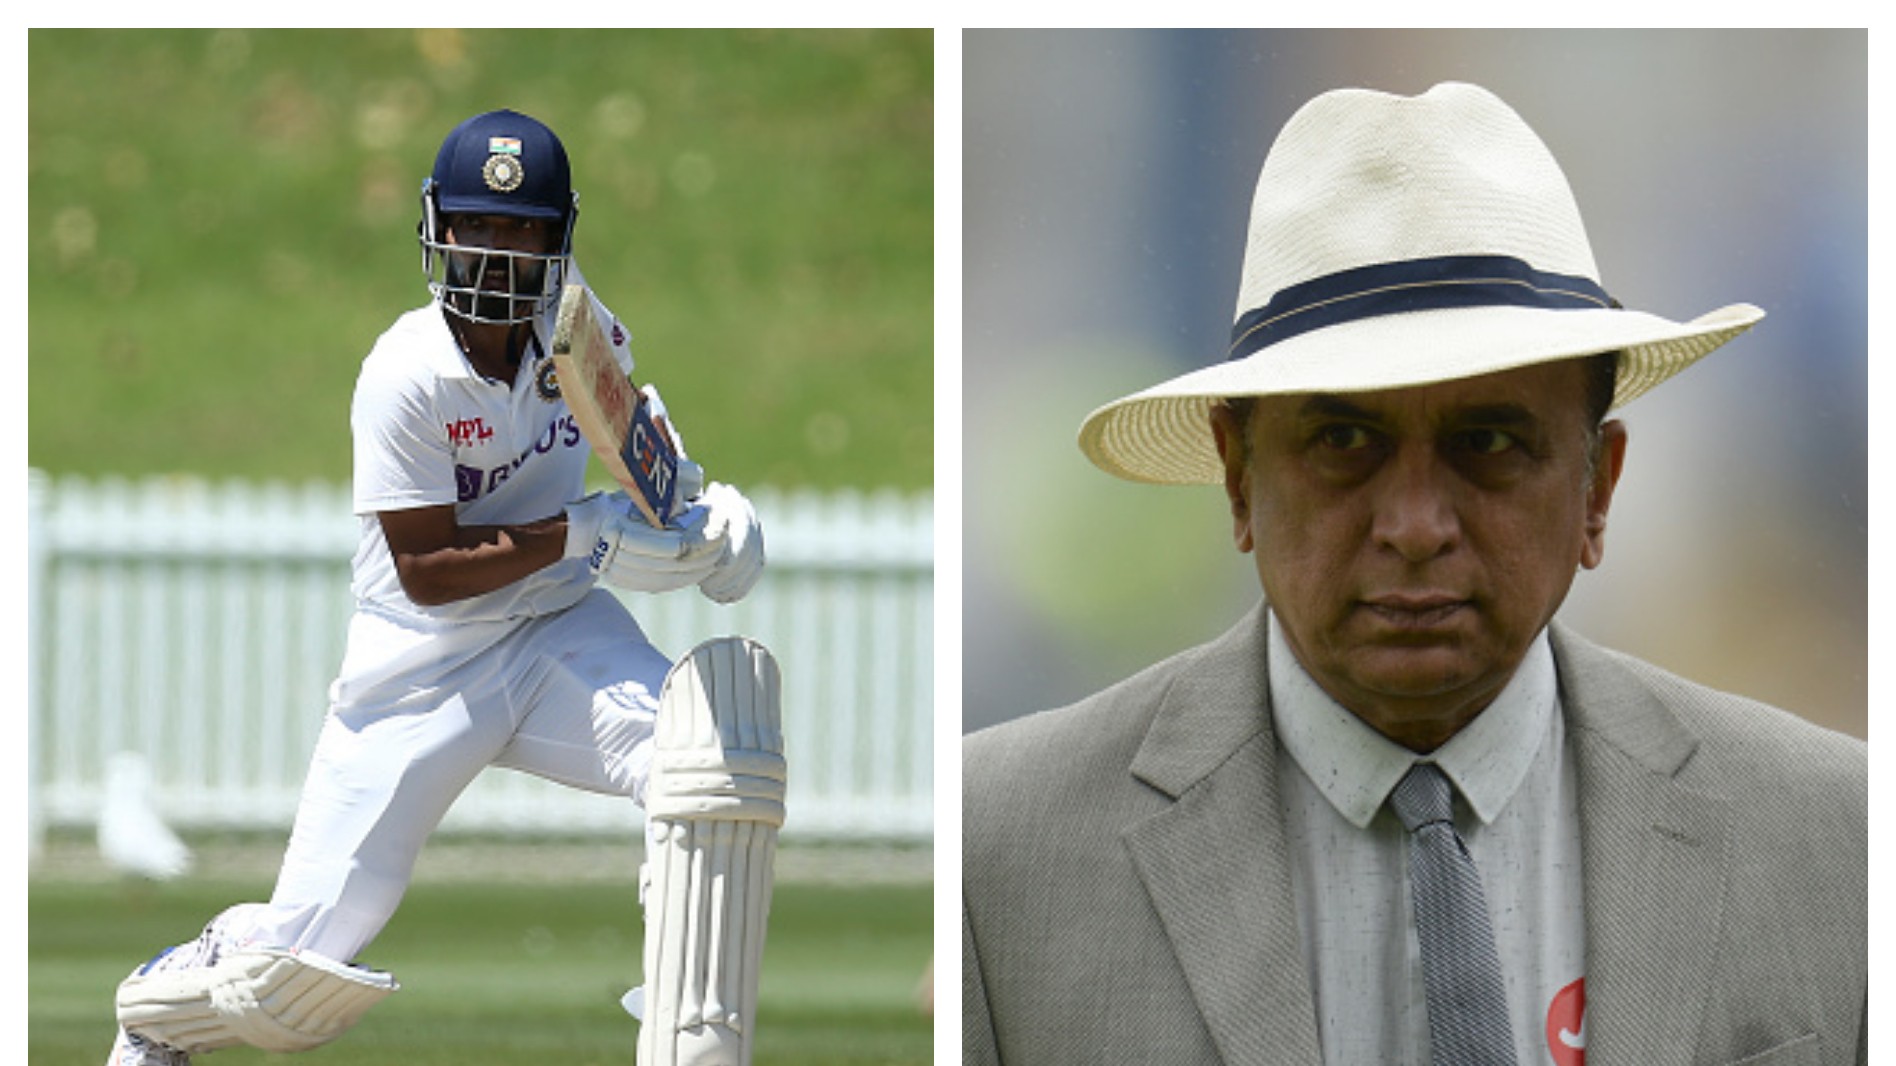 AUS v IND 2020-21: Gavaskar expects Rahane to not be bogged down by the pressure of captaincy 